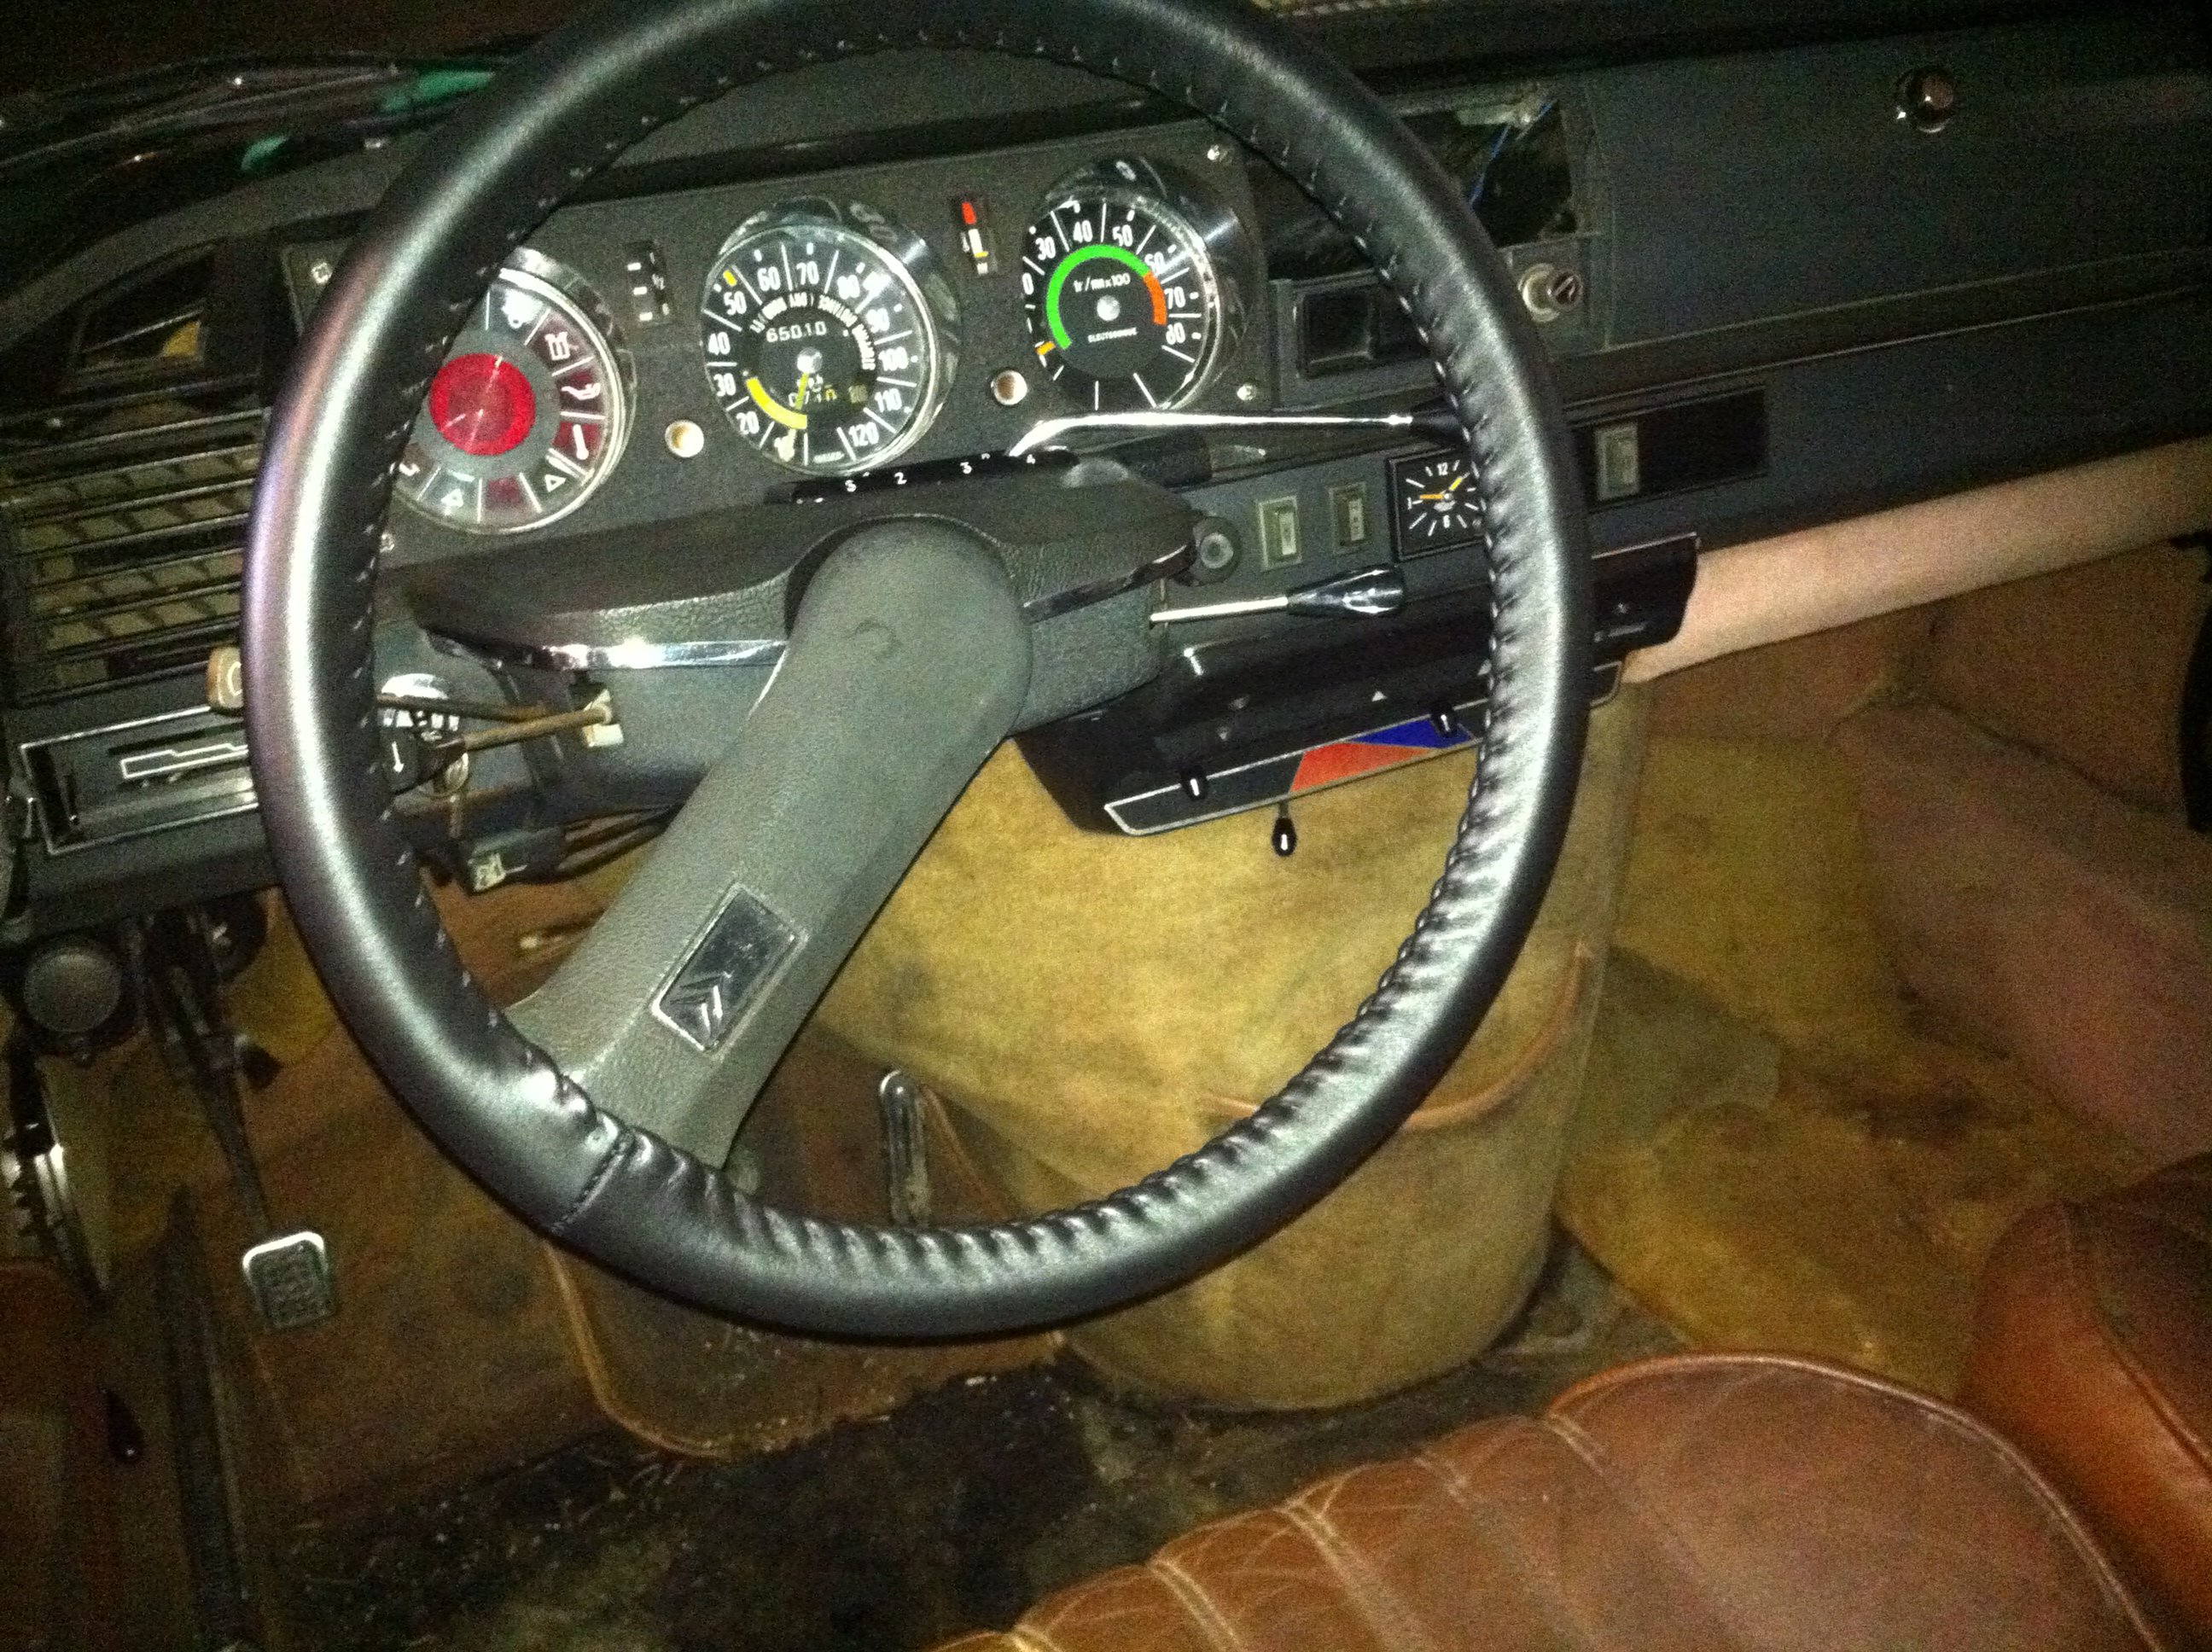 New leather steering wheel cover - very soft :-)